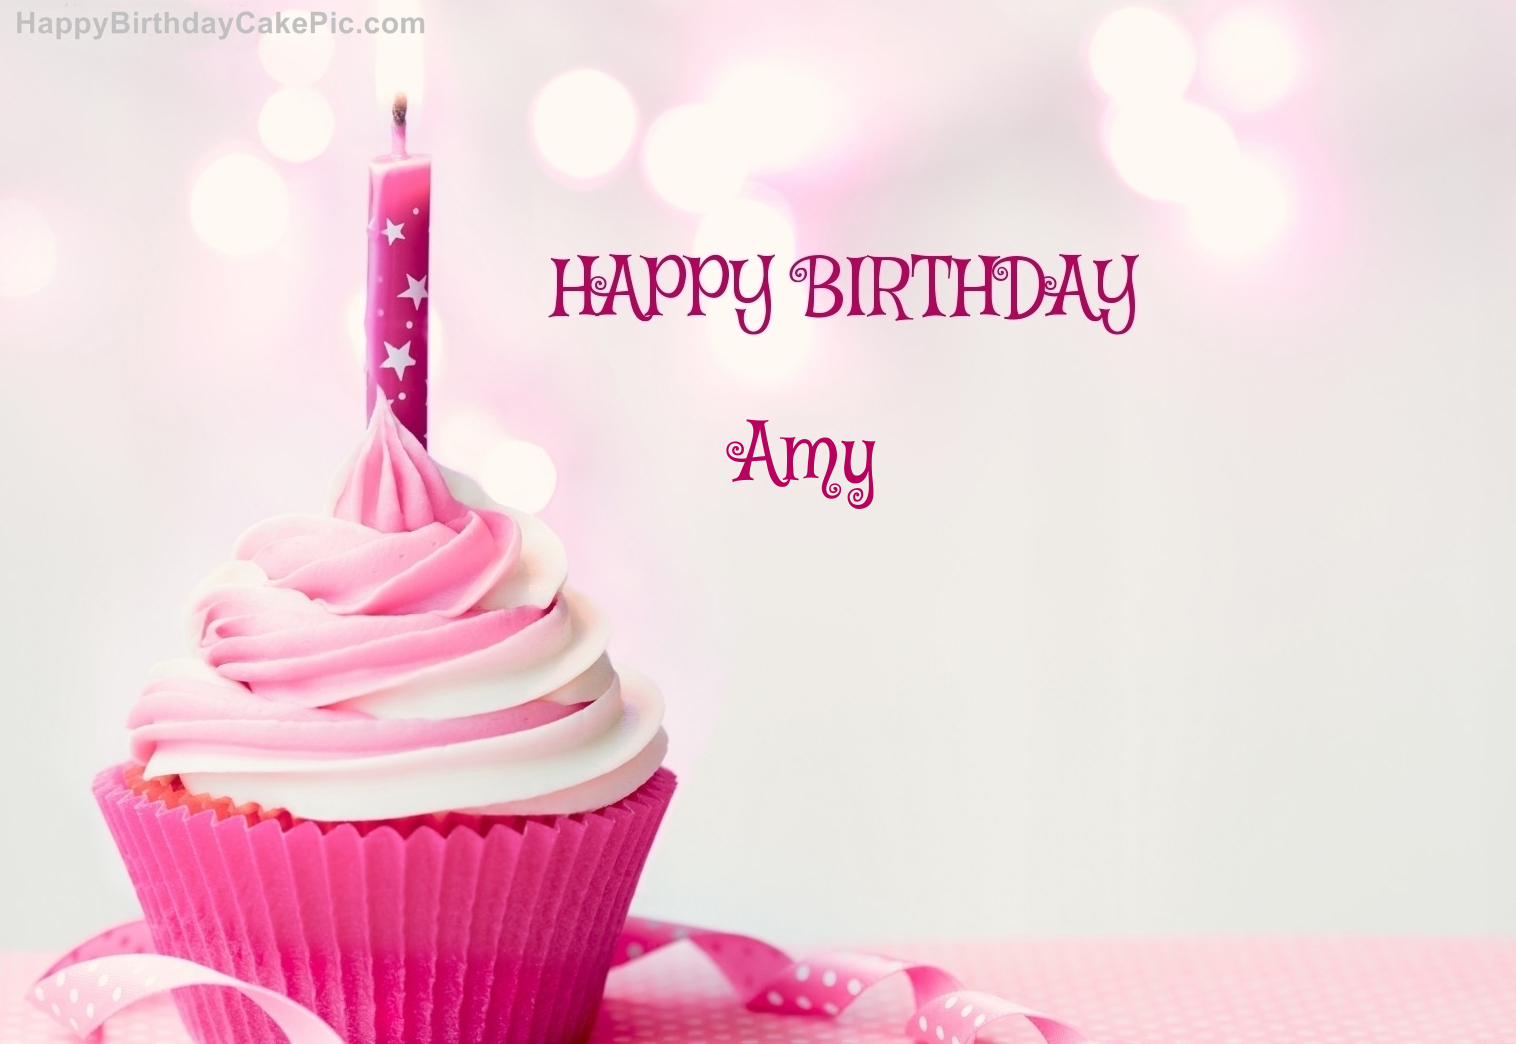 http://happybirthdaycakepic.com/pic-preview/Amy/7/happy-birthday-cupcake-candle-pink-picture-for-Amy.jpg